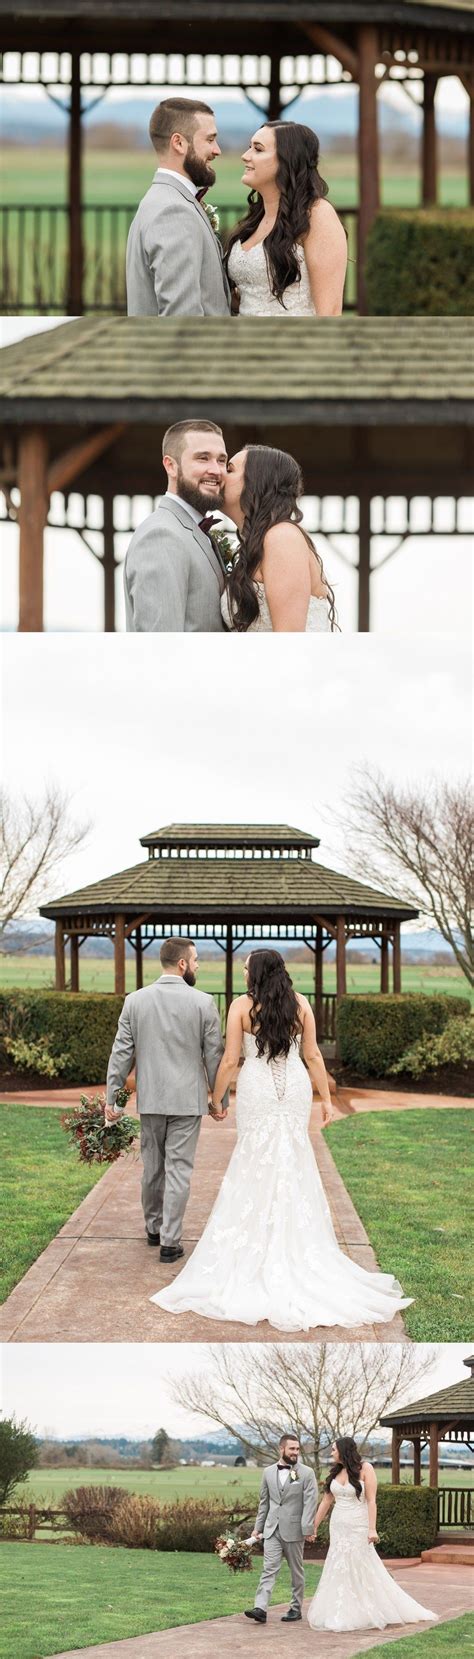 Photos Of A Bride And Groom Holding Hands And Kissing